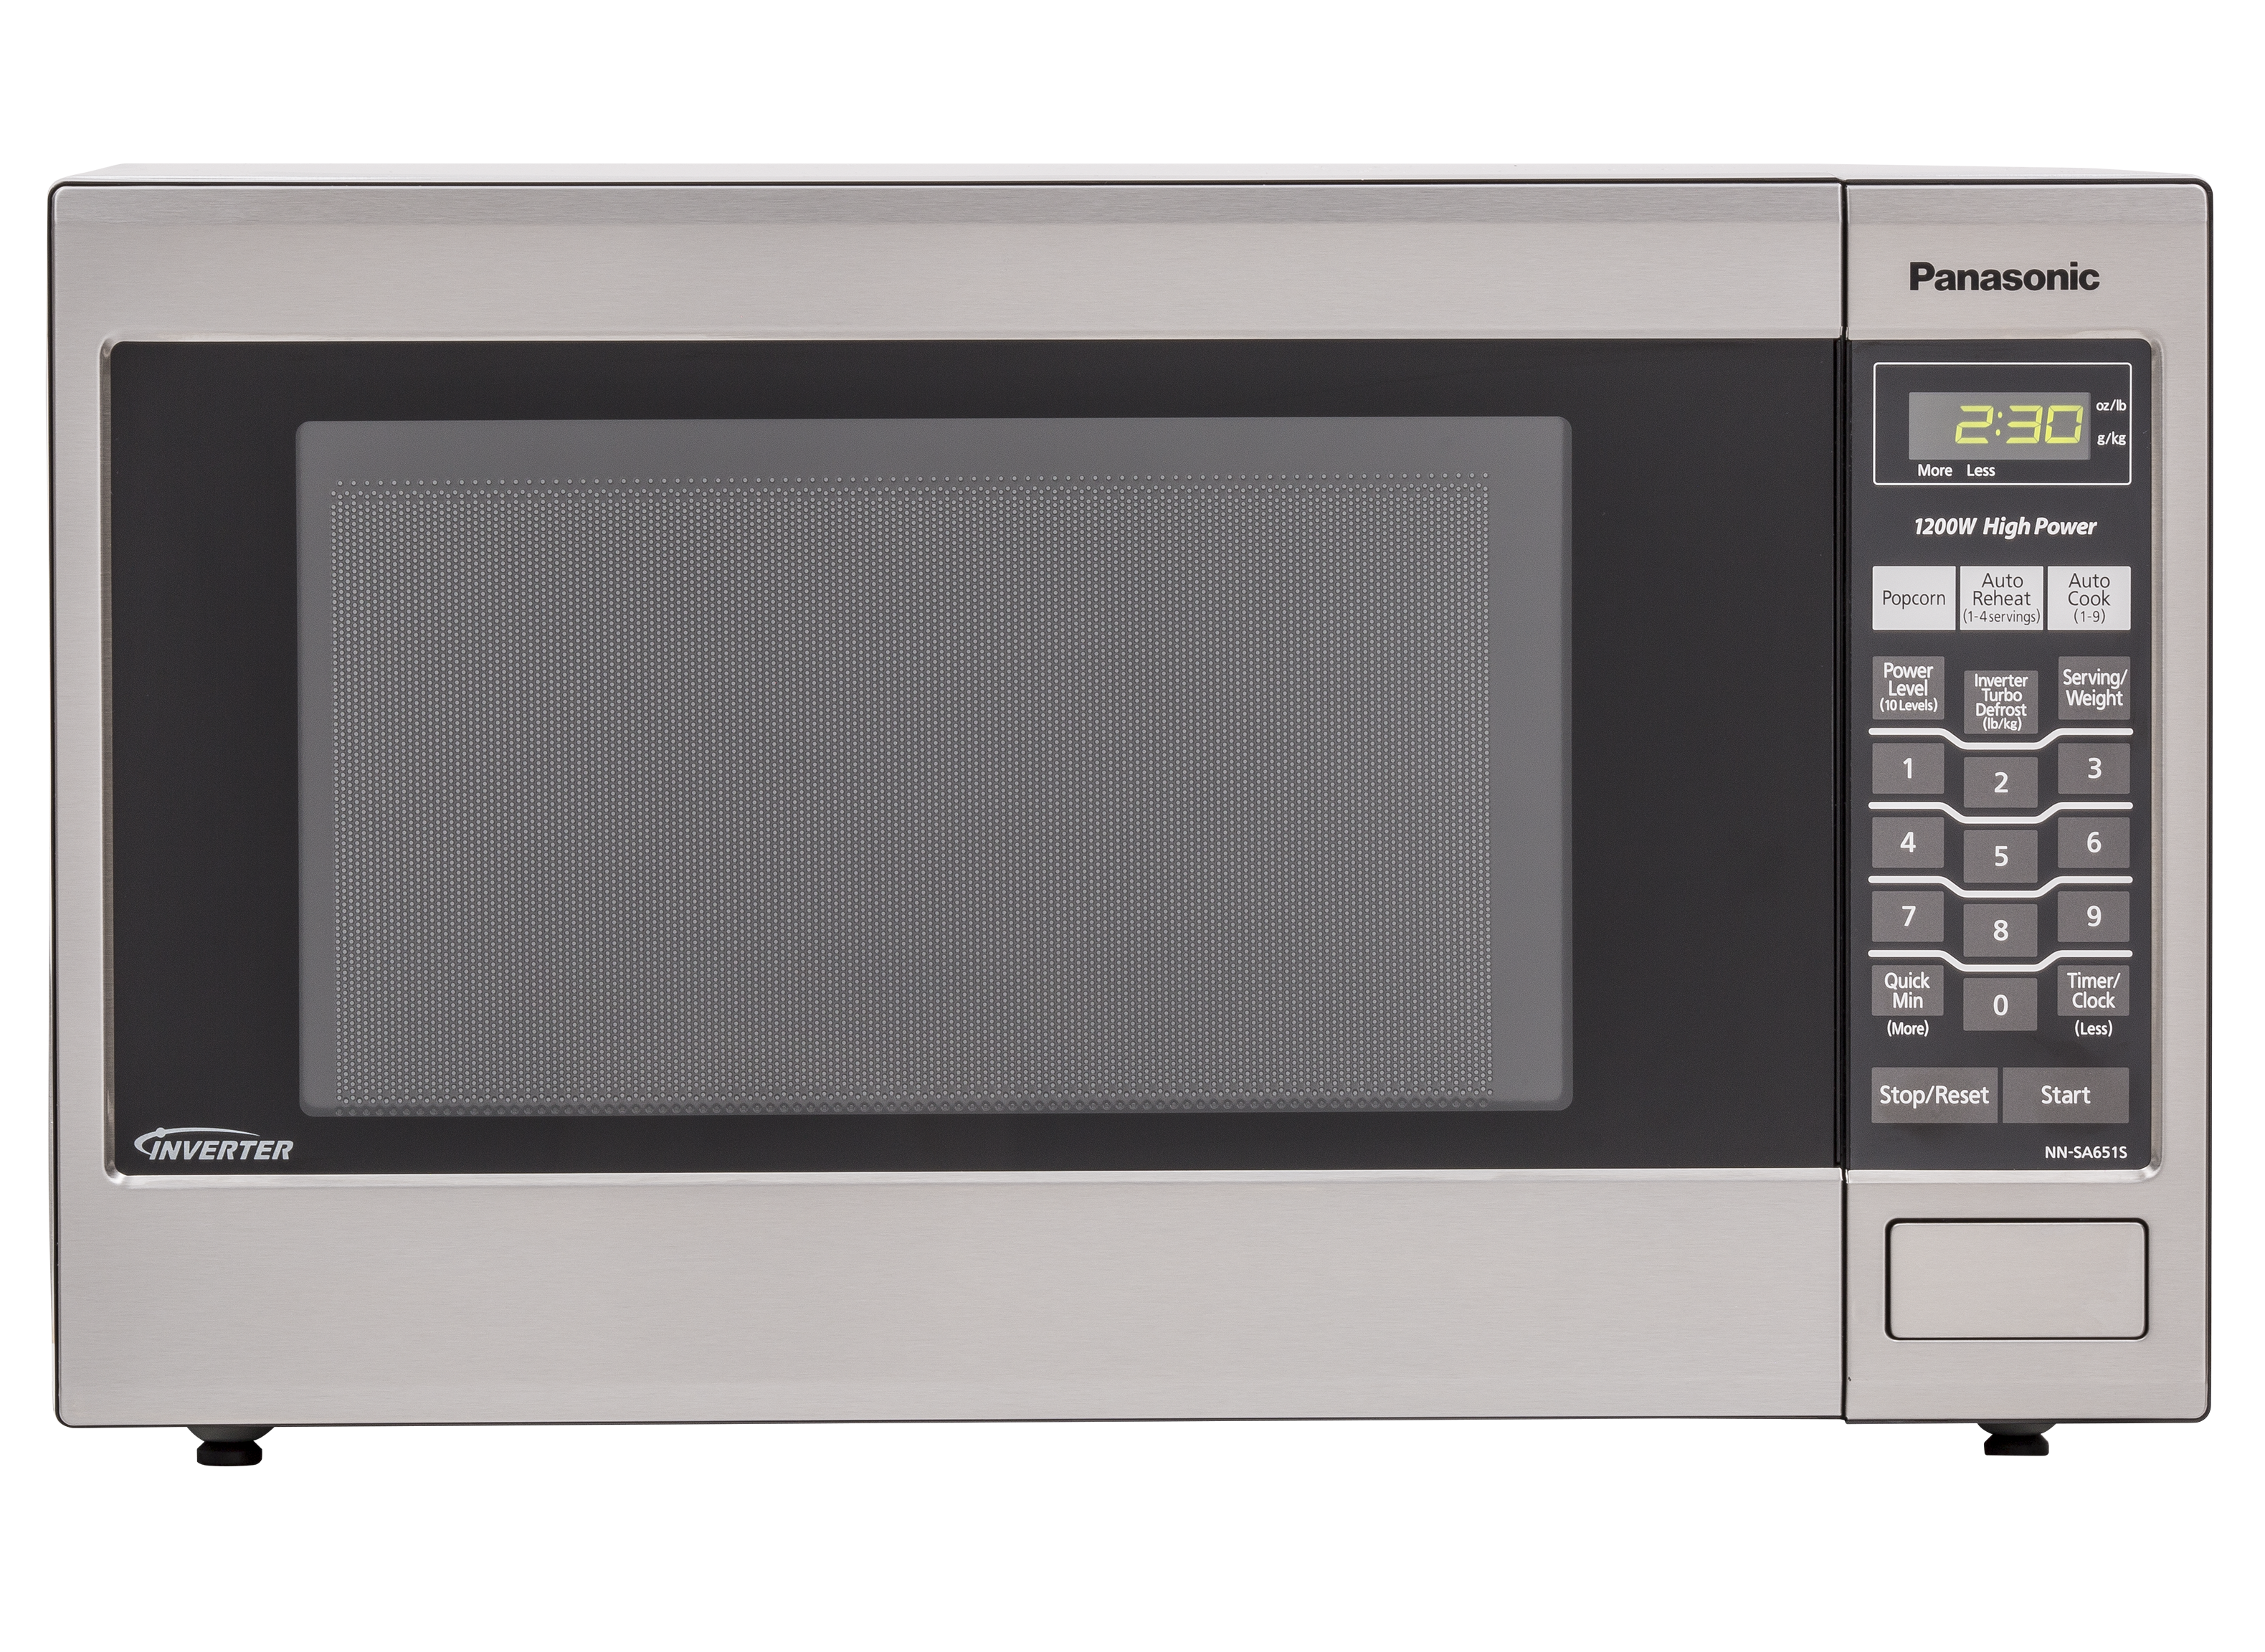 Panasonic Inverter Microwave- new technology review - YouTube